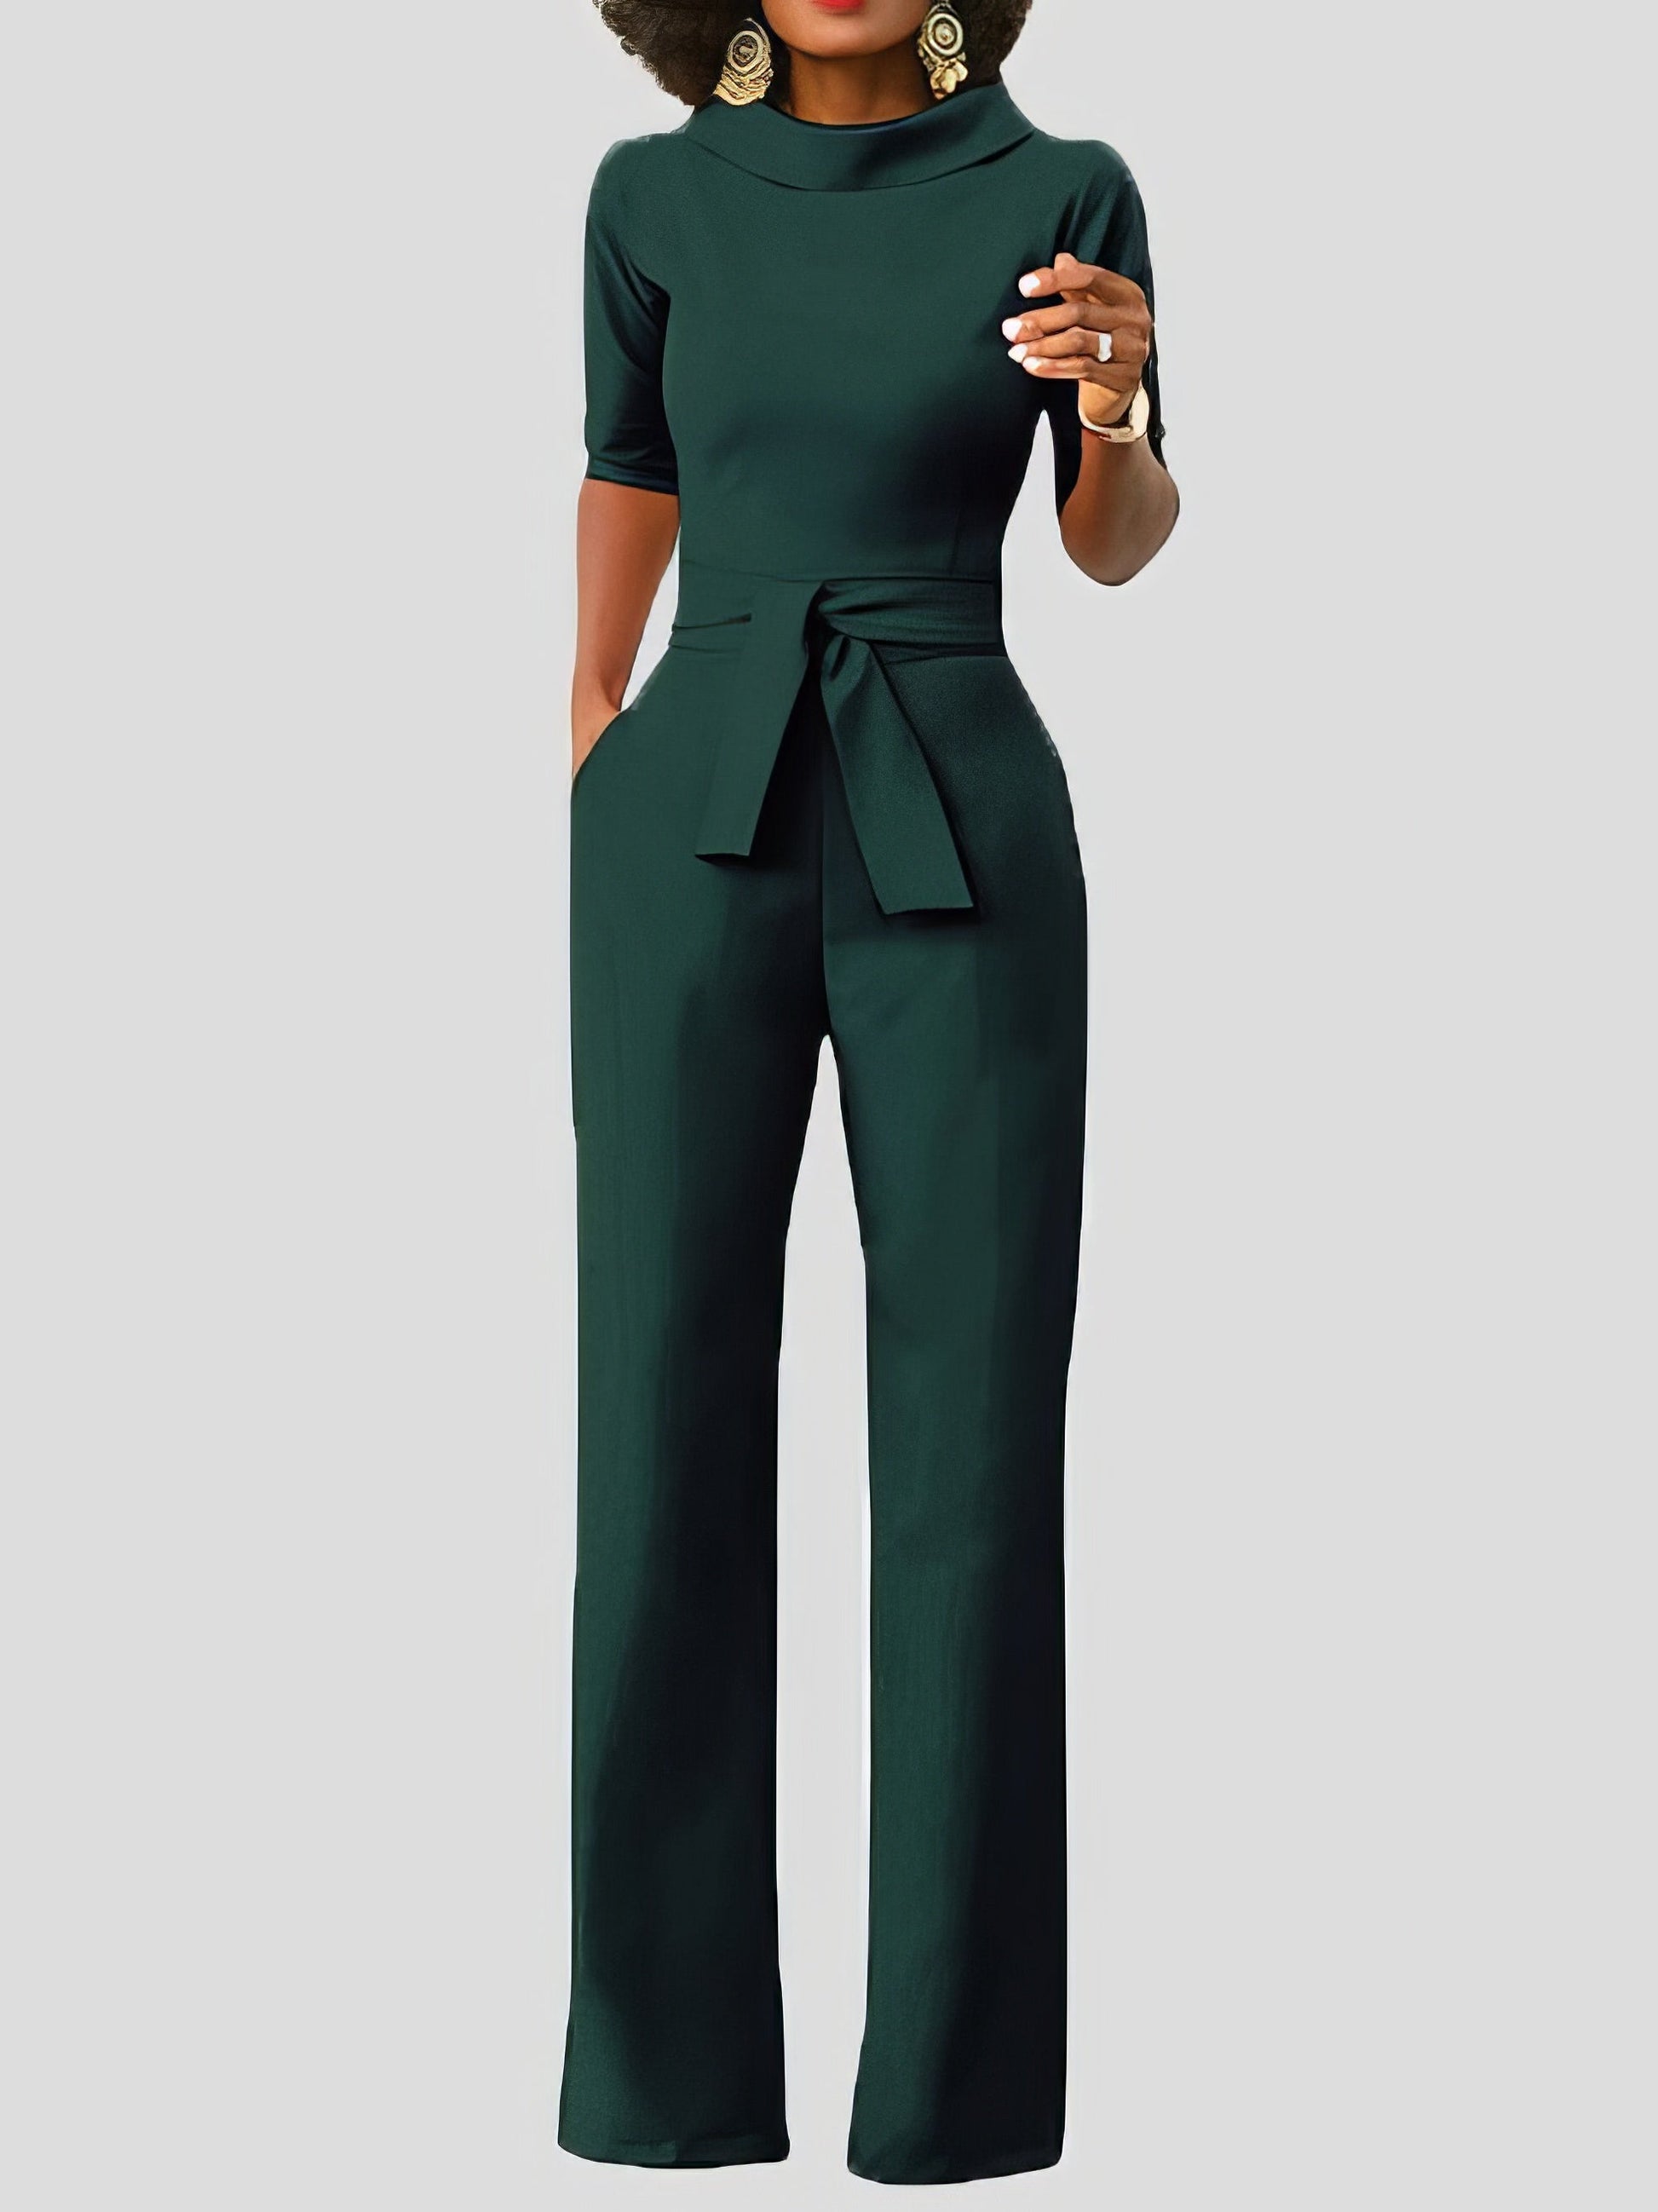 Jumpsuits - Solid Five-Point Sleeve Belted Wide-Leg Jumpsuit - MsDressly